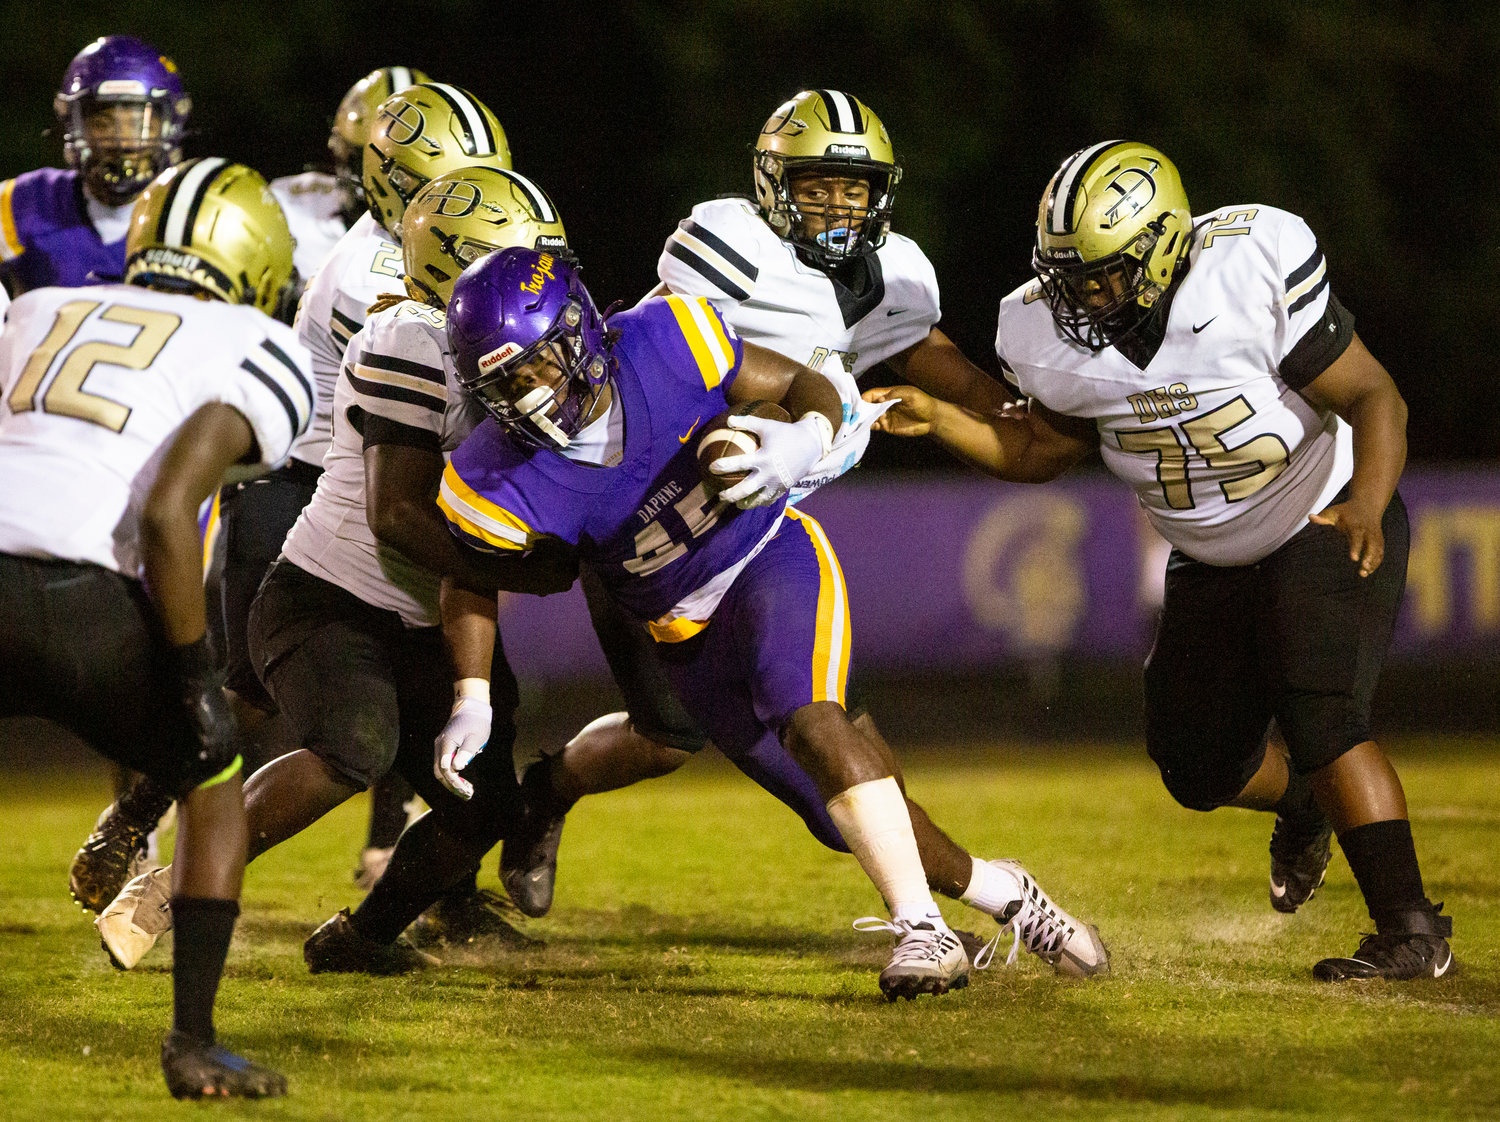 Trojan senior running back Nick Clark spins for more yardage on a first-half run during Daphne’s region game against Davidson at Jubilee Stadium Friday night. Clark opened the scoring with a three-yard touchdown run.